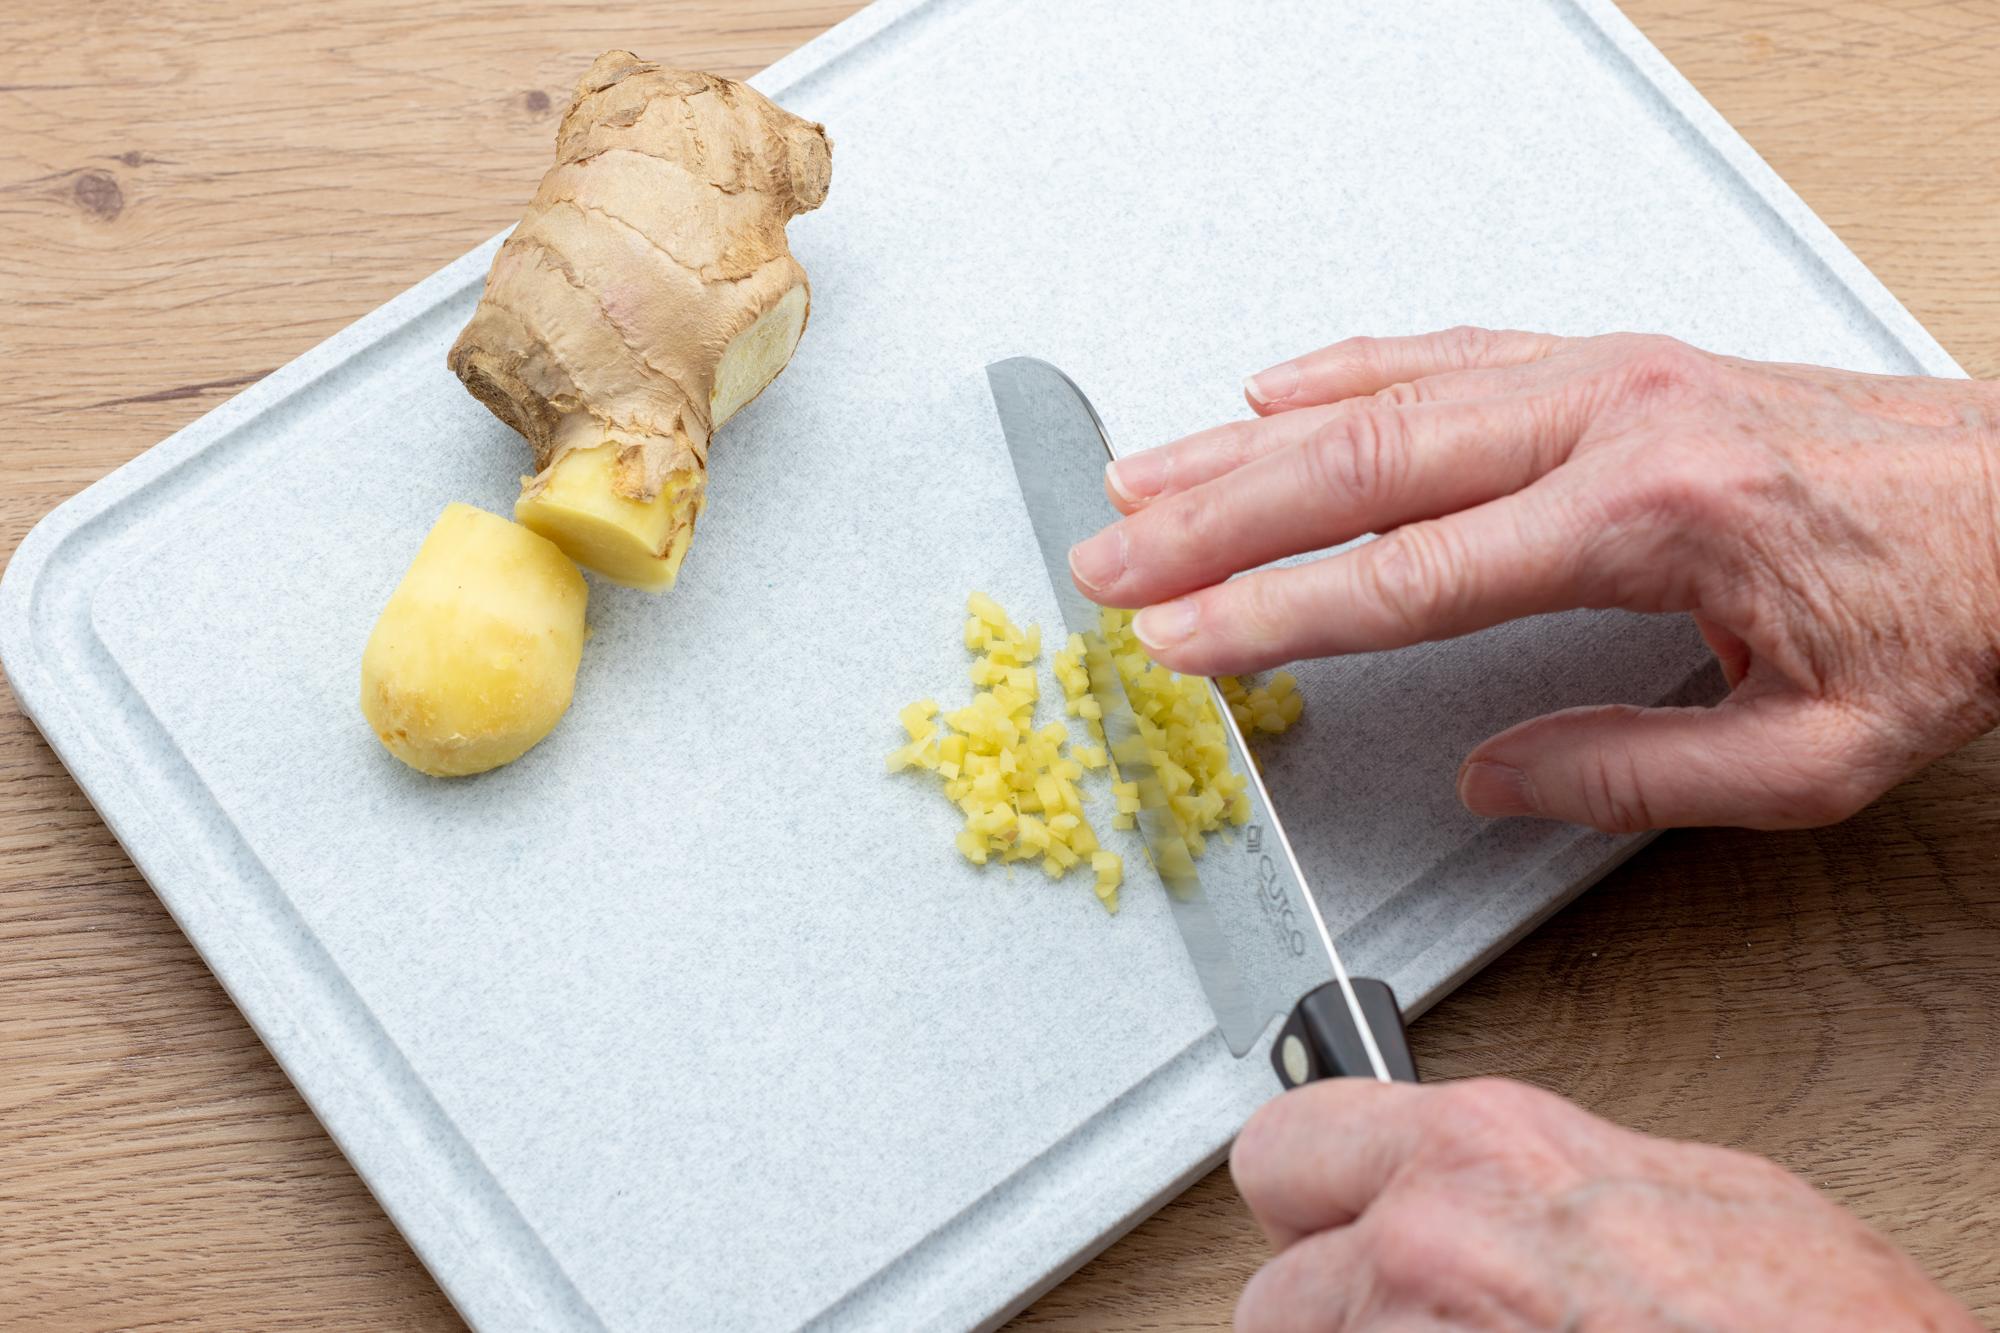 Petite Santoku used to mince the ginger.